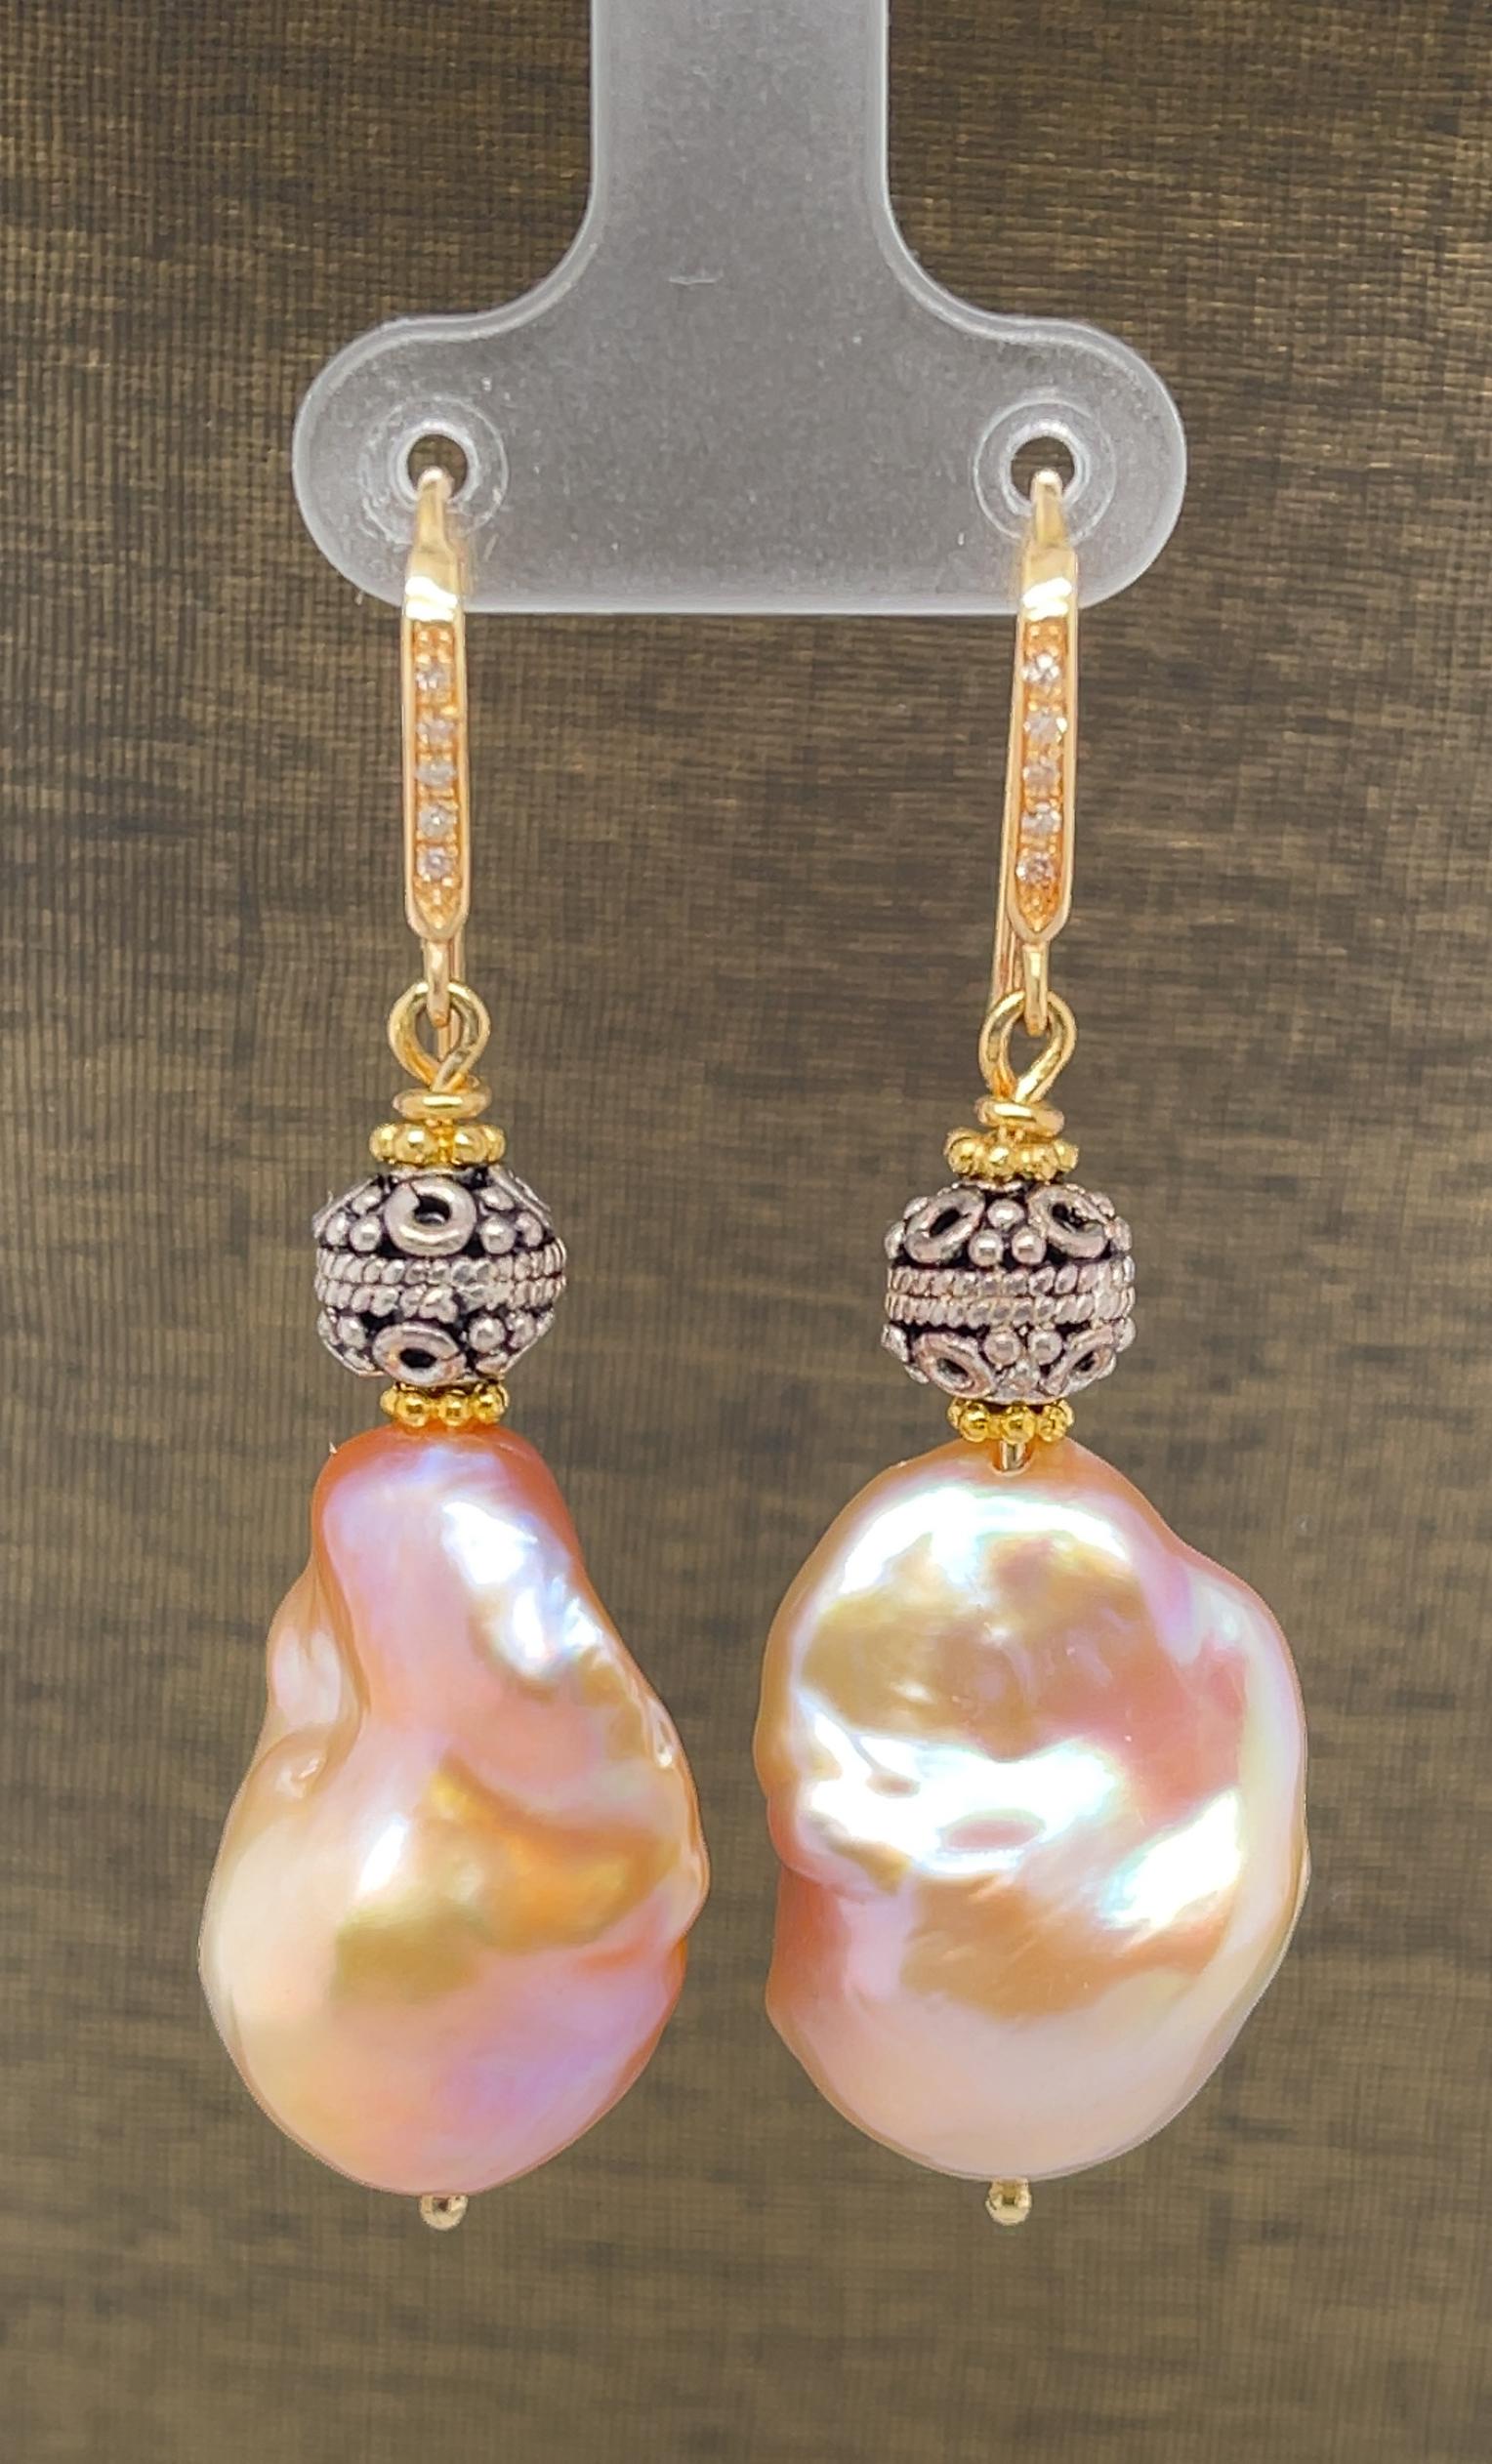 These pretty drop earrings feature large, freshwater baroque pearls with gorgeous silvery pink color and excellent luster. They are set in 18k yellow gold and accented with decorative sterling silver beads for a lovely combination of color and